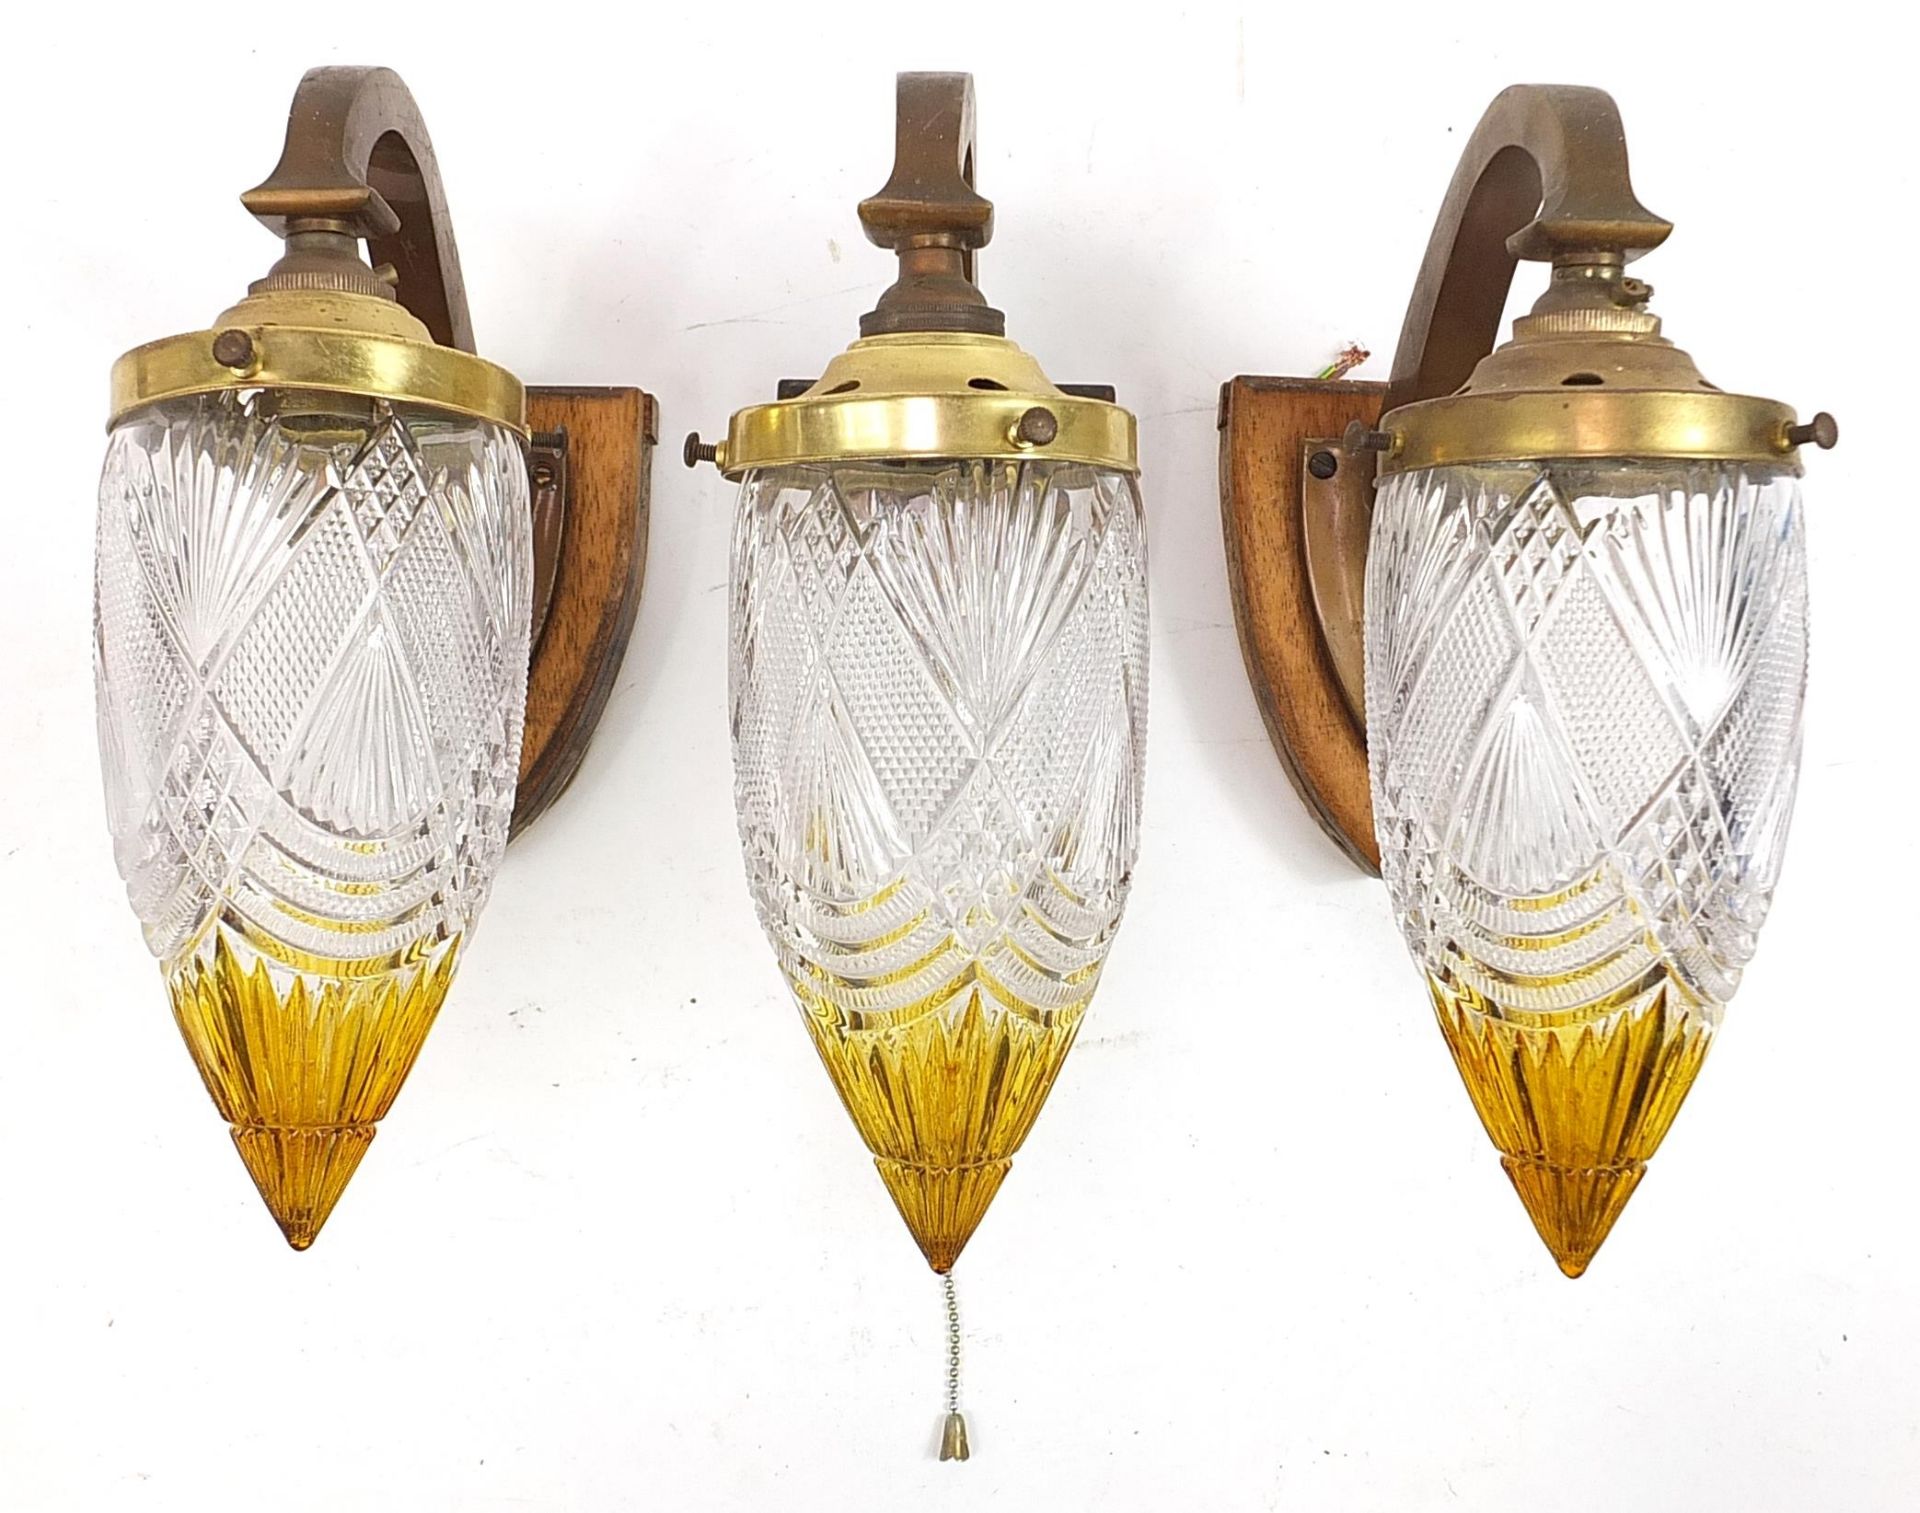 Three Secessionist style gilt metal wall lights with amber and clear glass shades, each 26cm high